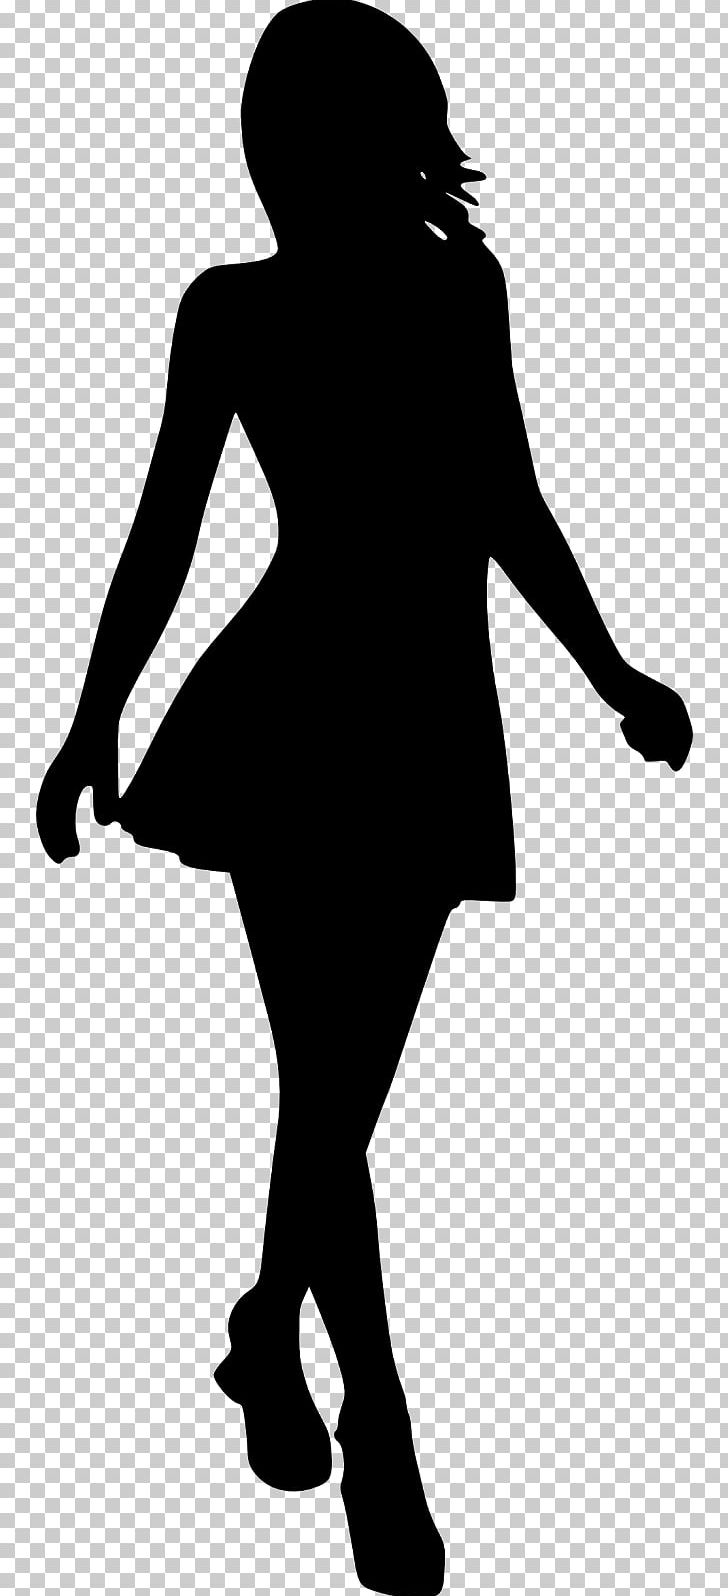 Woman Silhouette PNG, Clipart, Black, Black And White, Clip Art, Fashion, Female Body Shape Free PNG Download